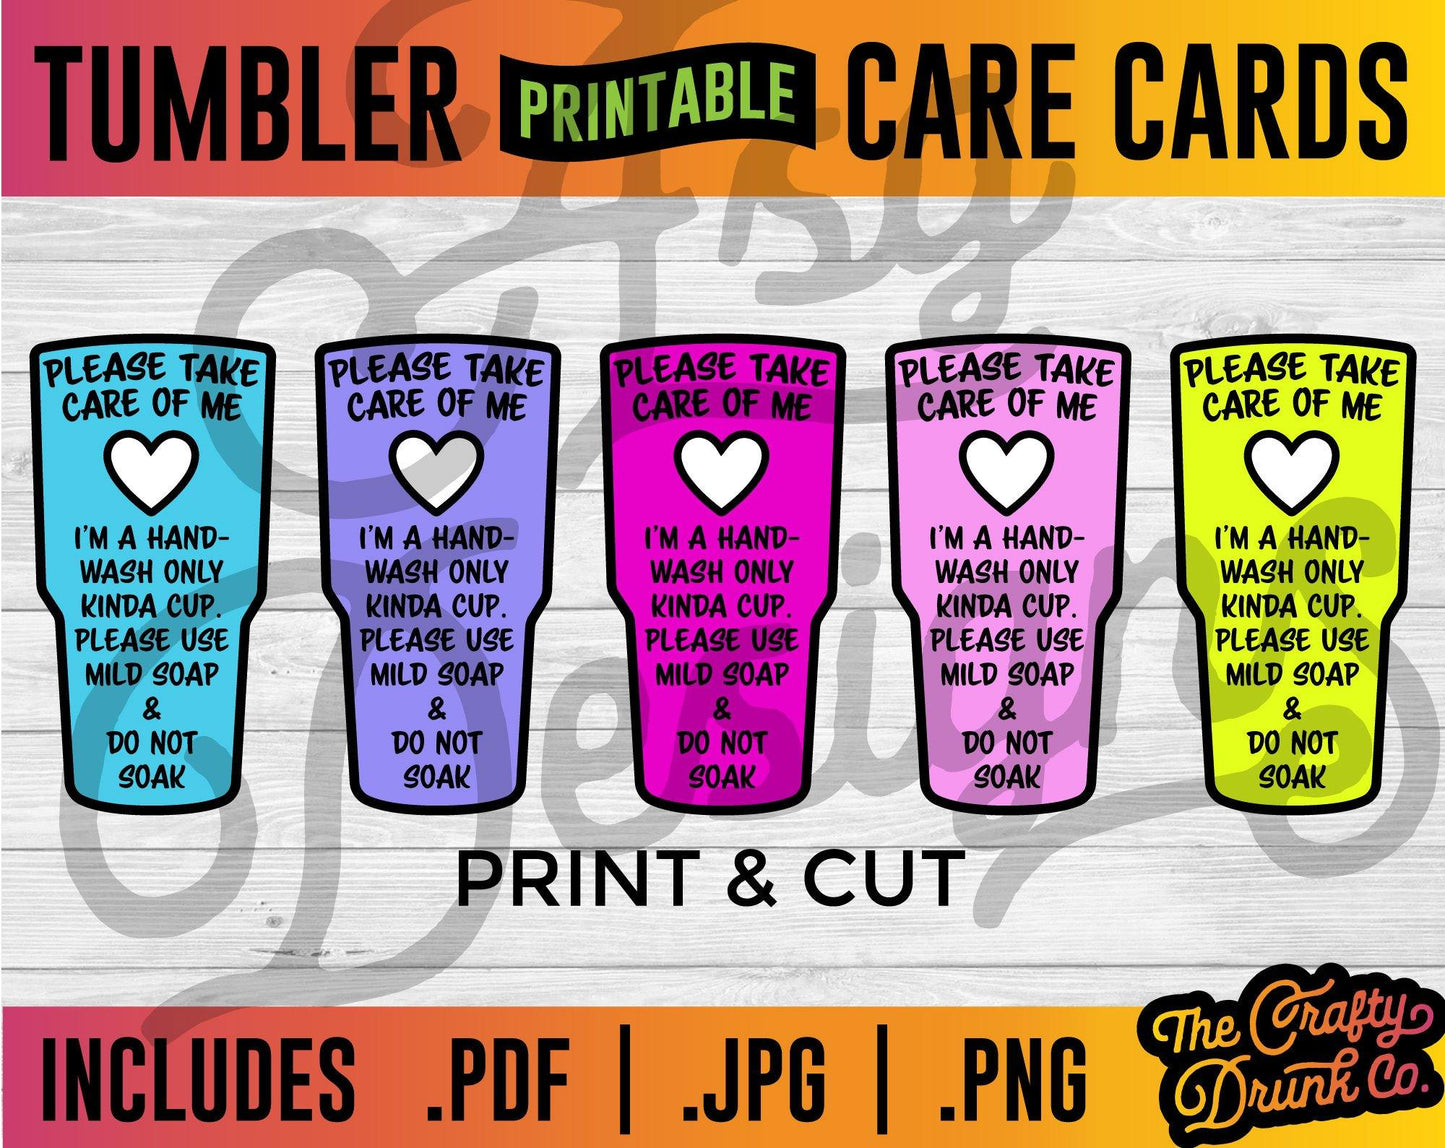 Skinny Tumbler Care Card, Sublimation Tumbler Care, Print and Cut Care Card,  Cup Care Card, Skinny Tumbler PNG, Sublimation Care Card 